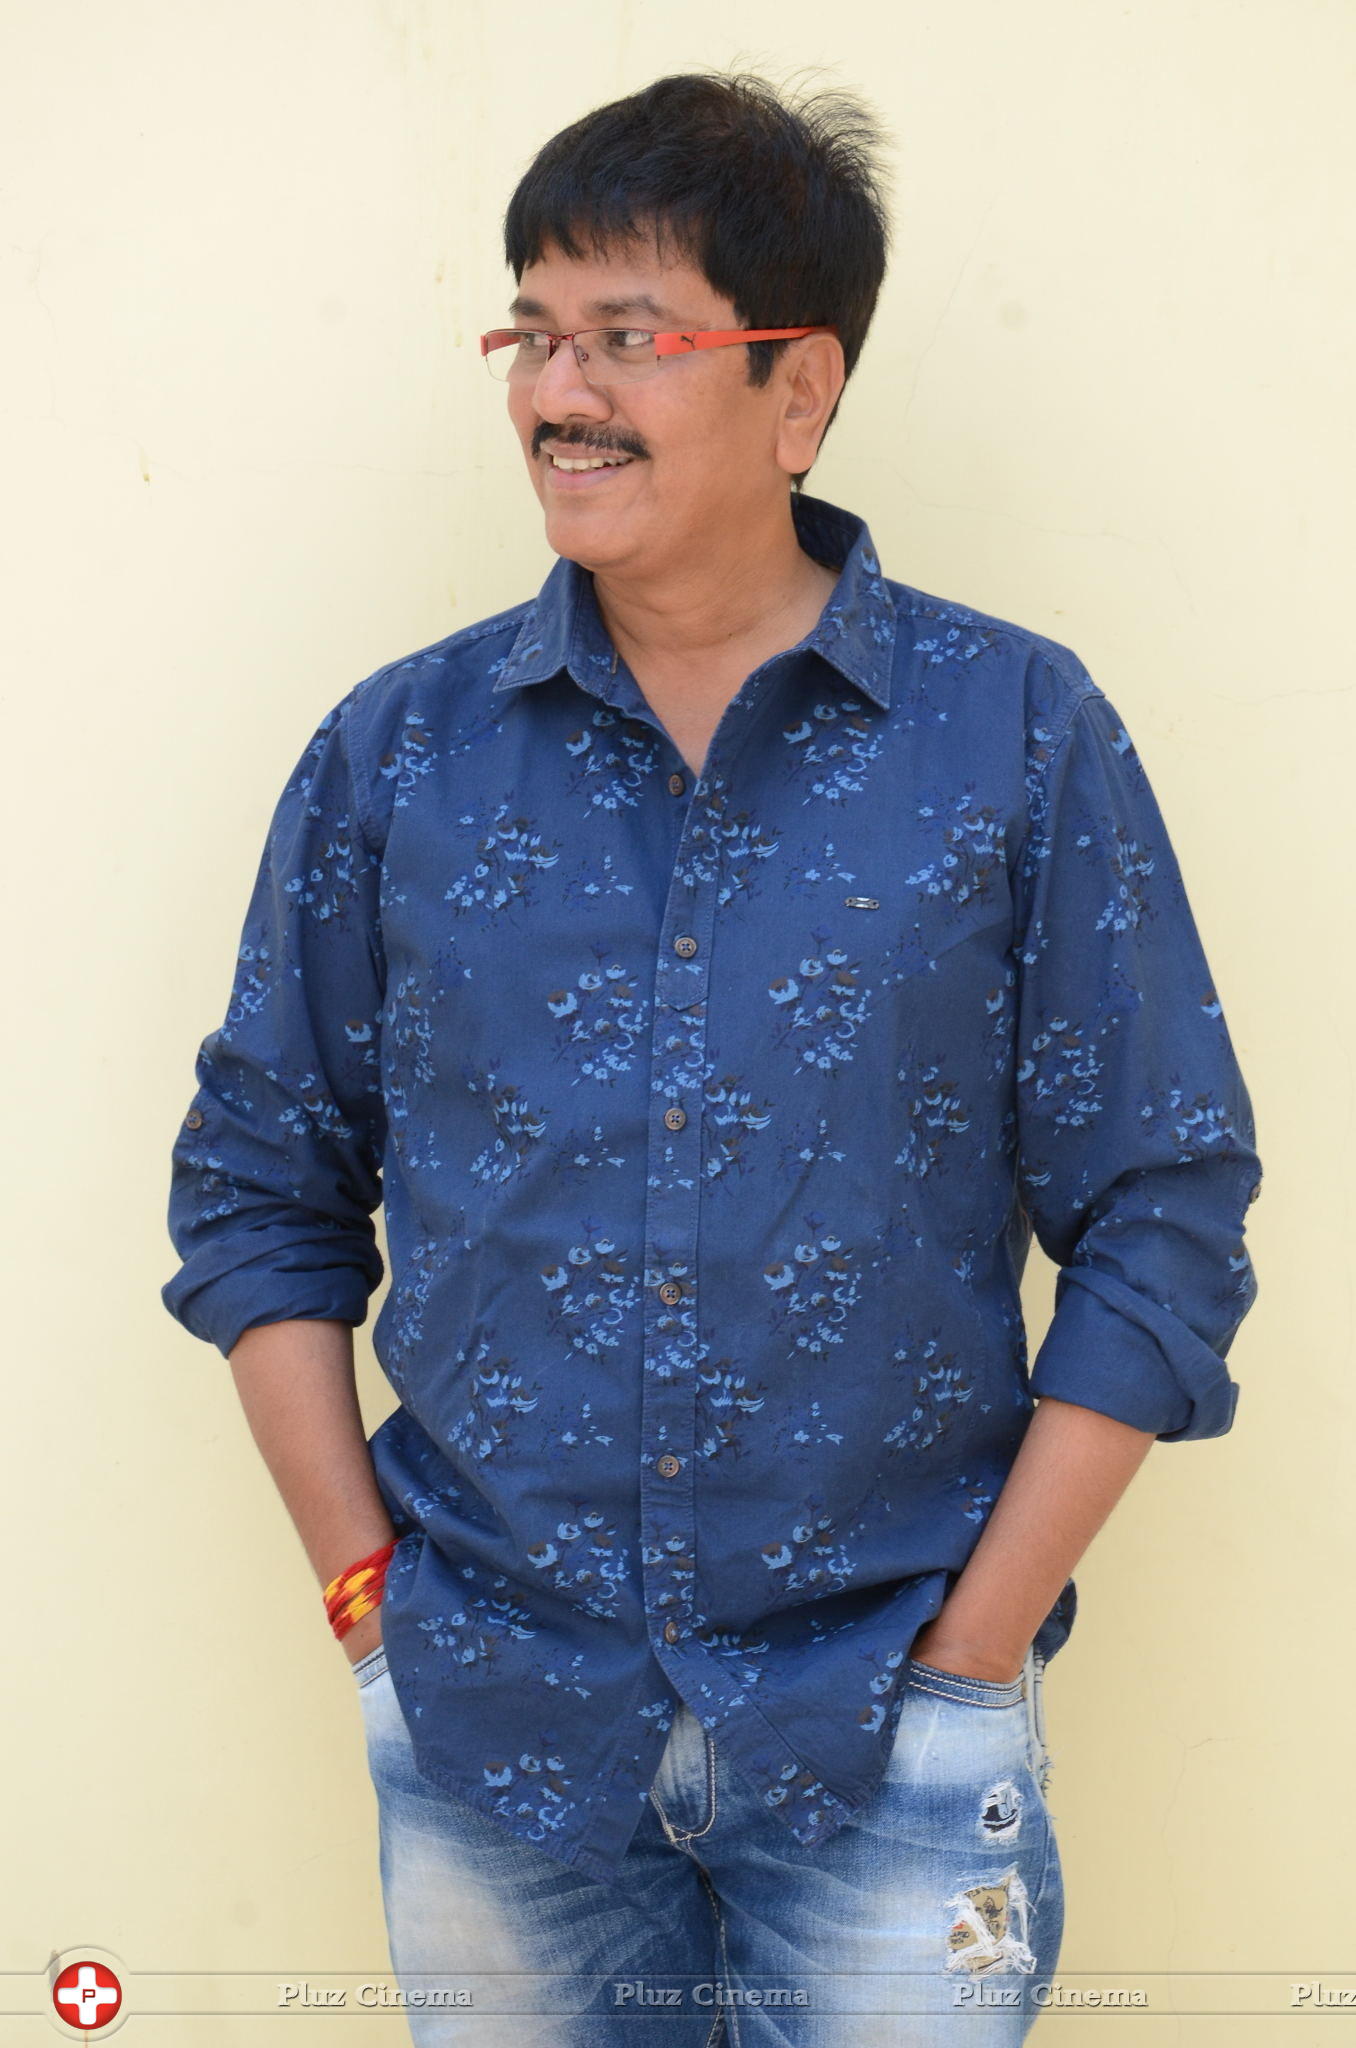 Director Nageswara Reddy Interview Photos | Picture 1286692